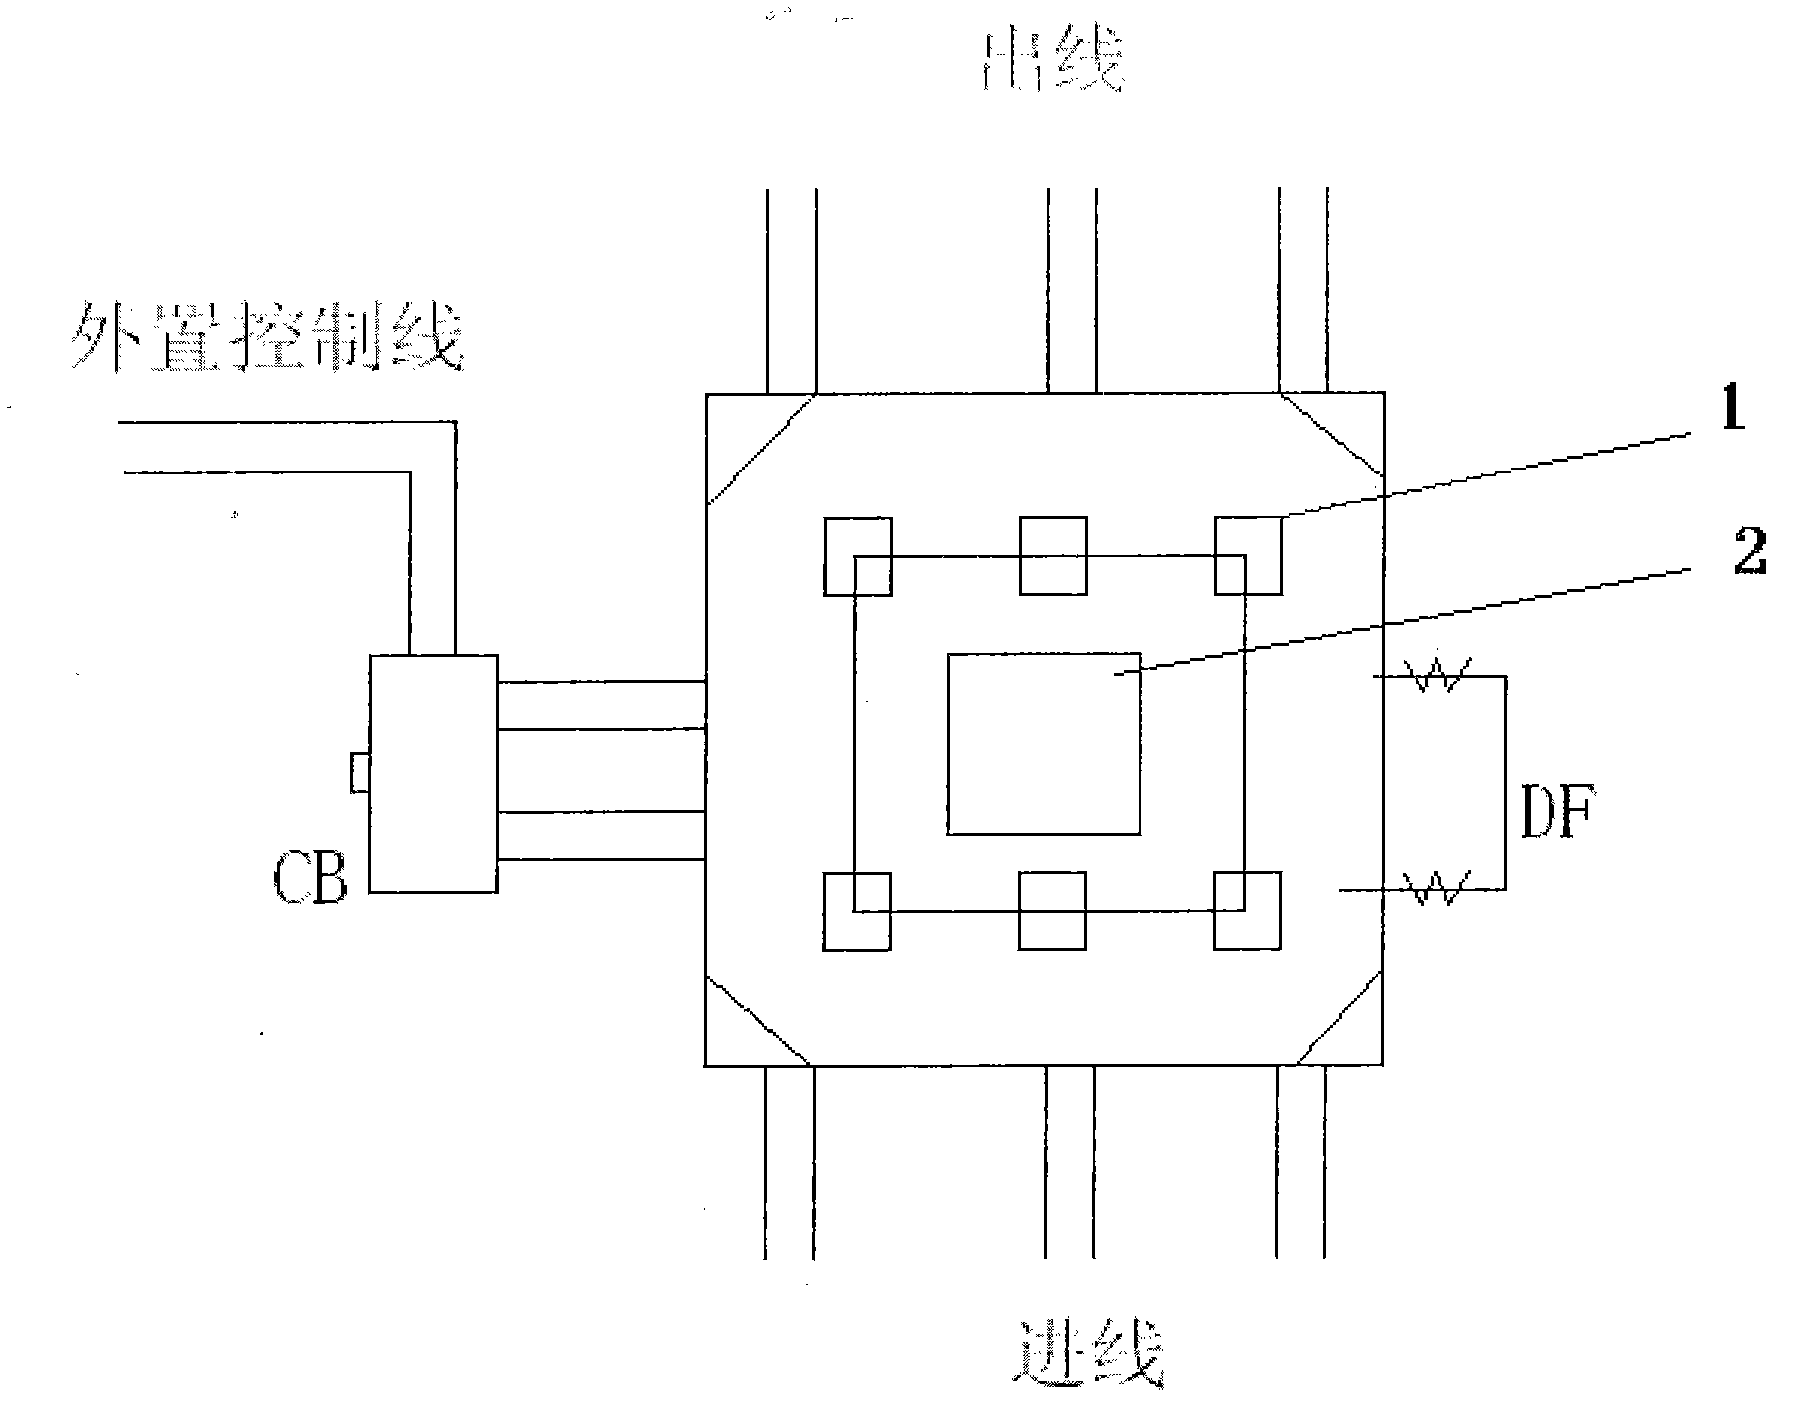 Non-voltage energy-saving AC (Alternating Current) contactor